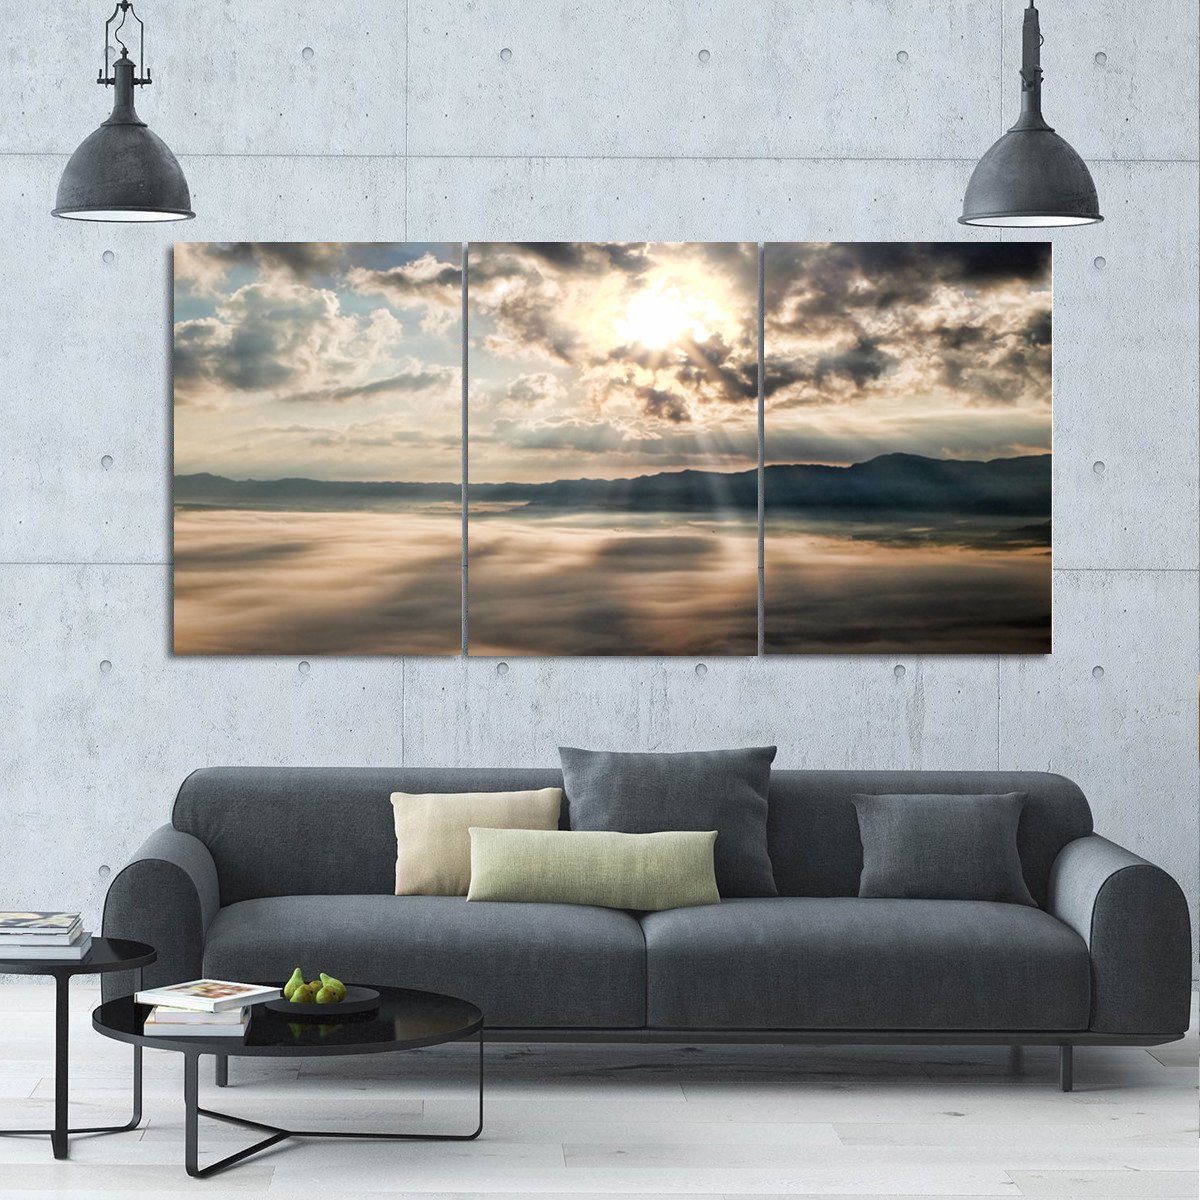 ✝️An awakening can help bring peace in trying times 🌄. This is a perfect gift for the person who needs support, strength, and encouragement right now! ❤️
Get It Here：coolteesandthings.com/products/the-a…  #theawakening #wallart #sunrise